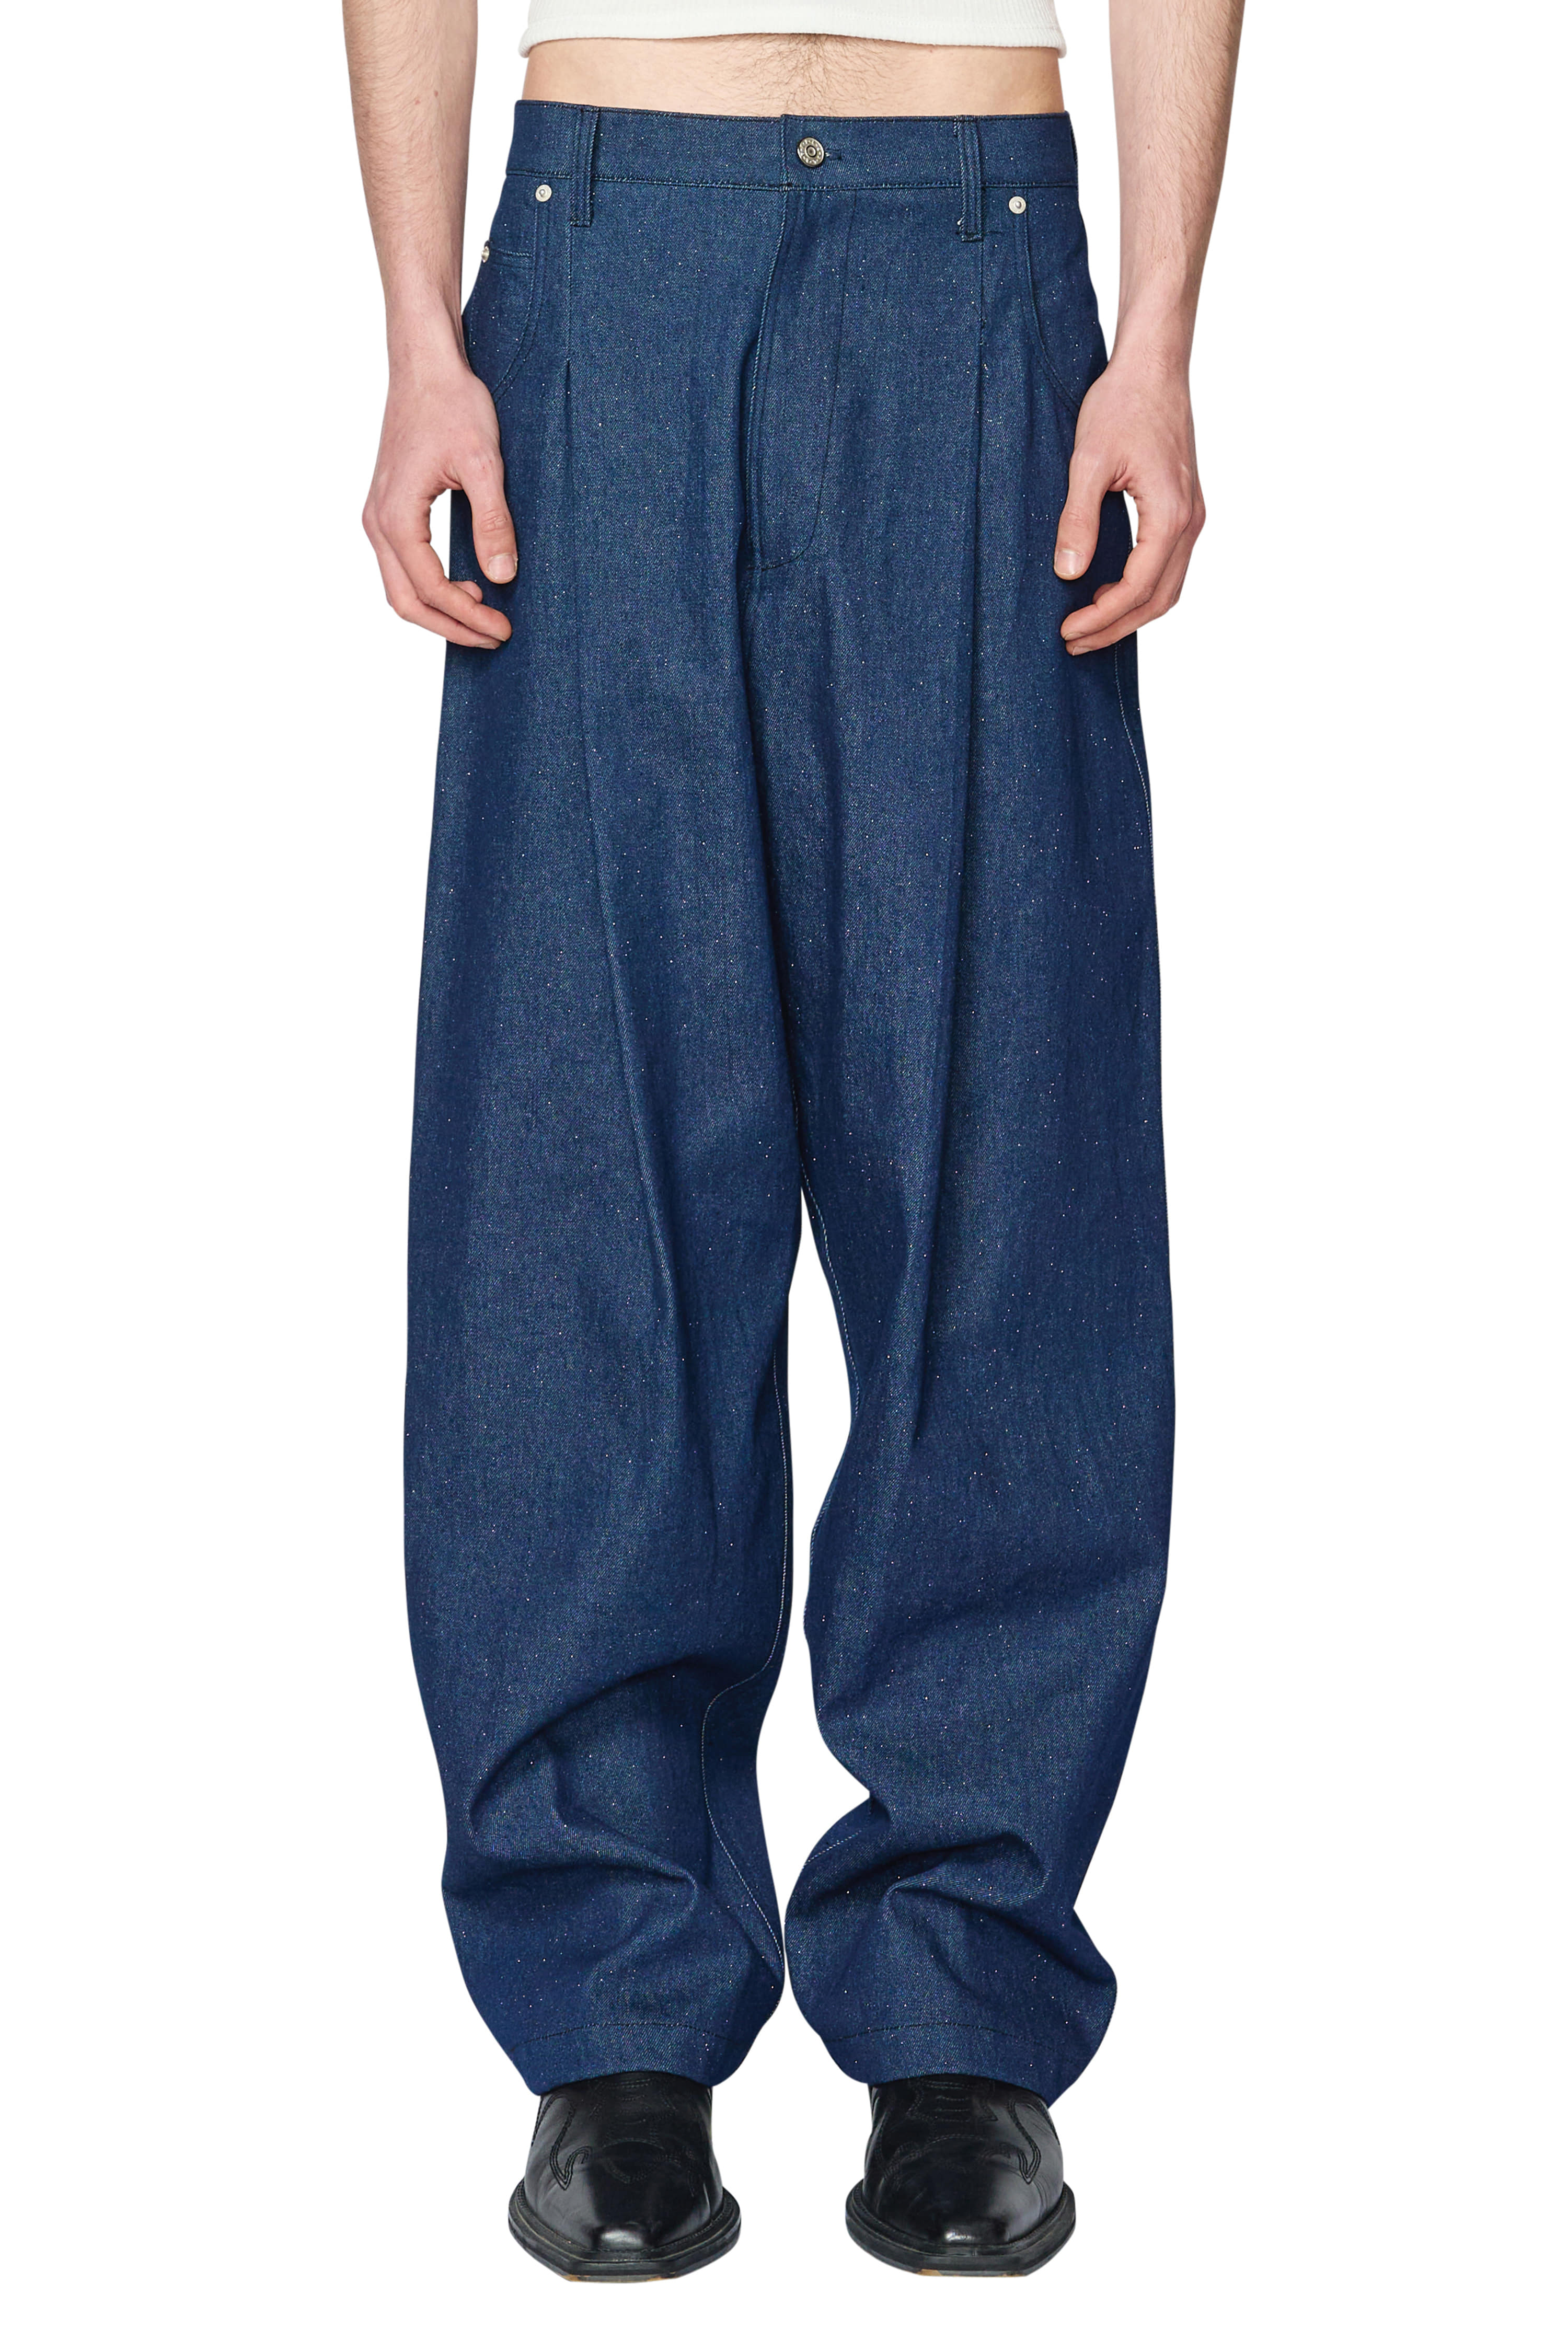 [ Delivery from 5/1 ] BLUE GLITTERY TUCKED DENIM TROUSERS